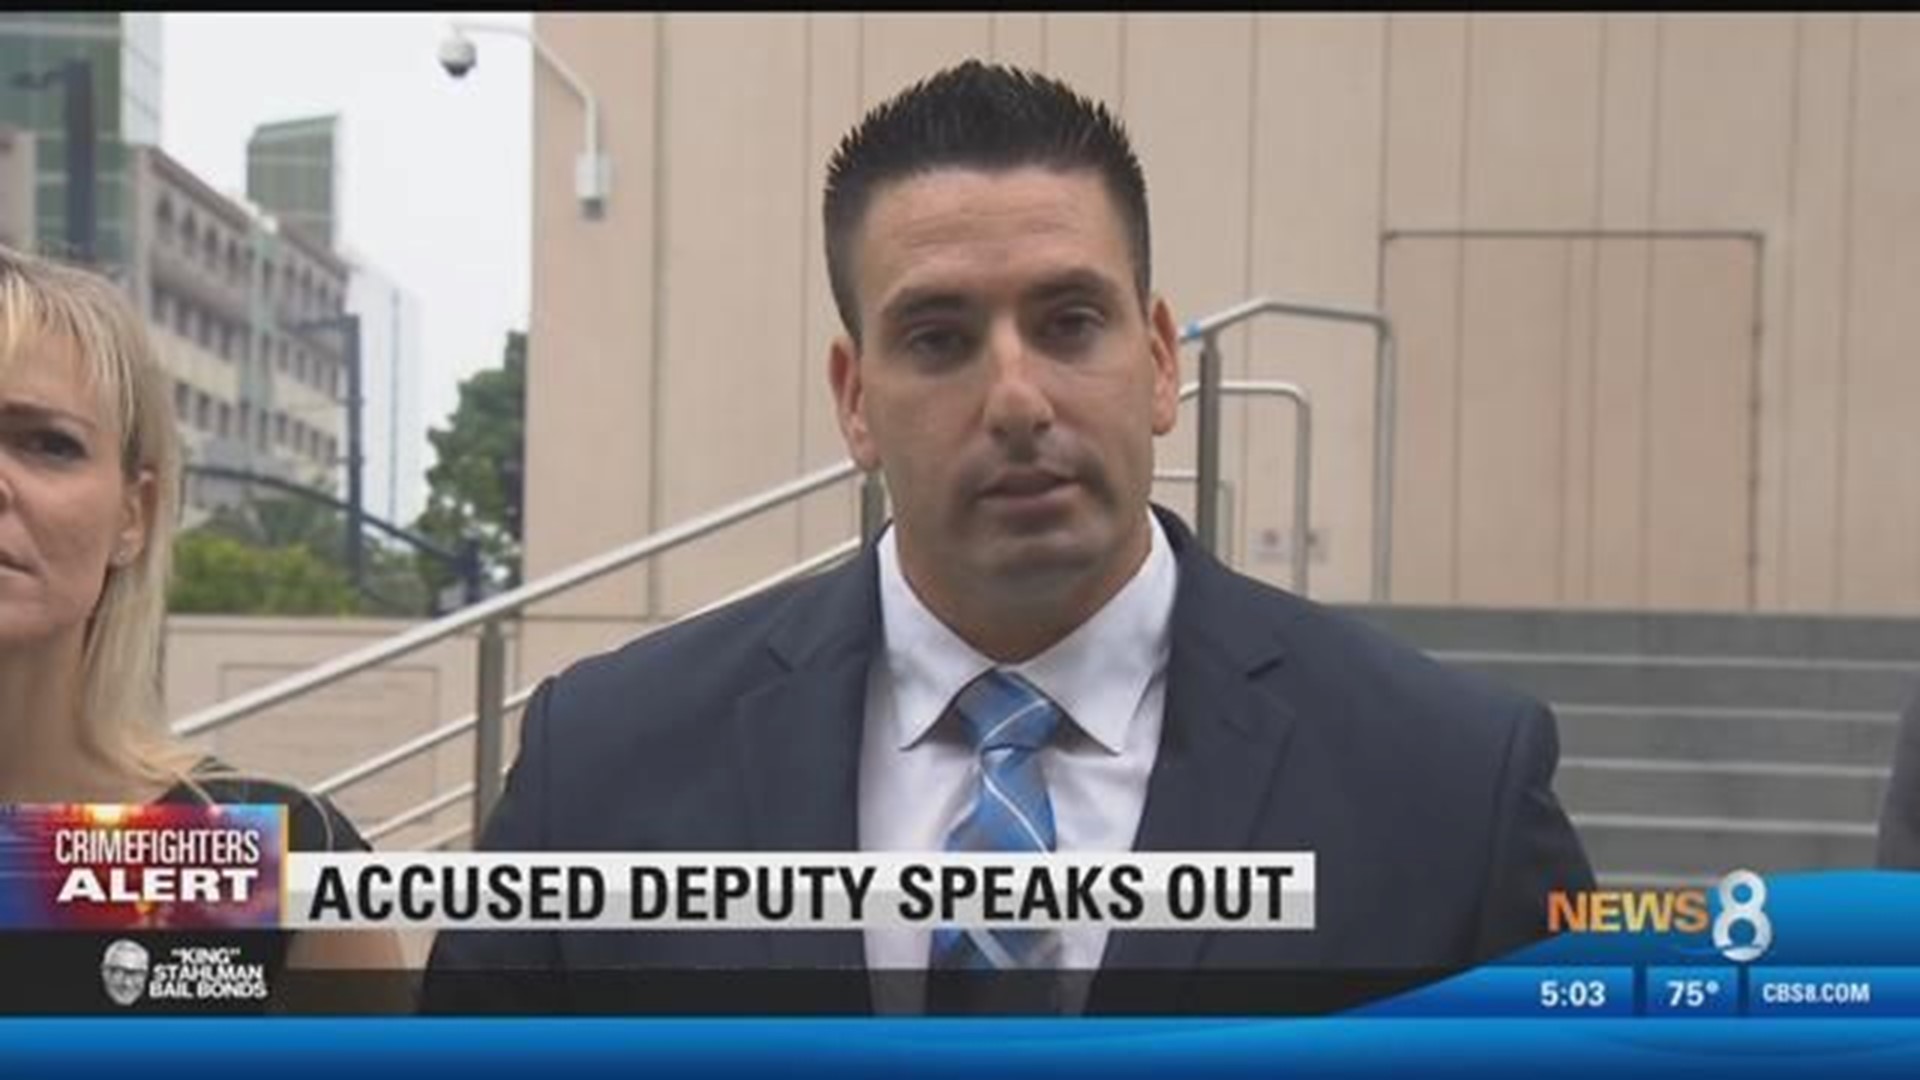 Sheriffs Deputy Accused Of Sexual Misconduct Speaks Publicly 